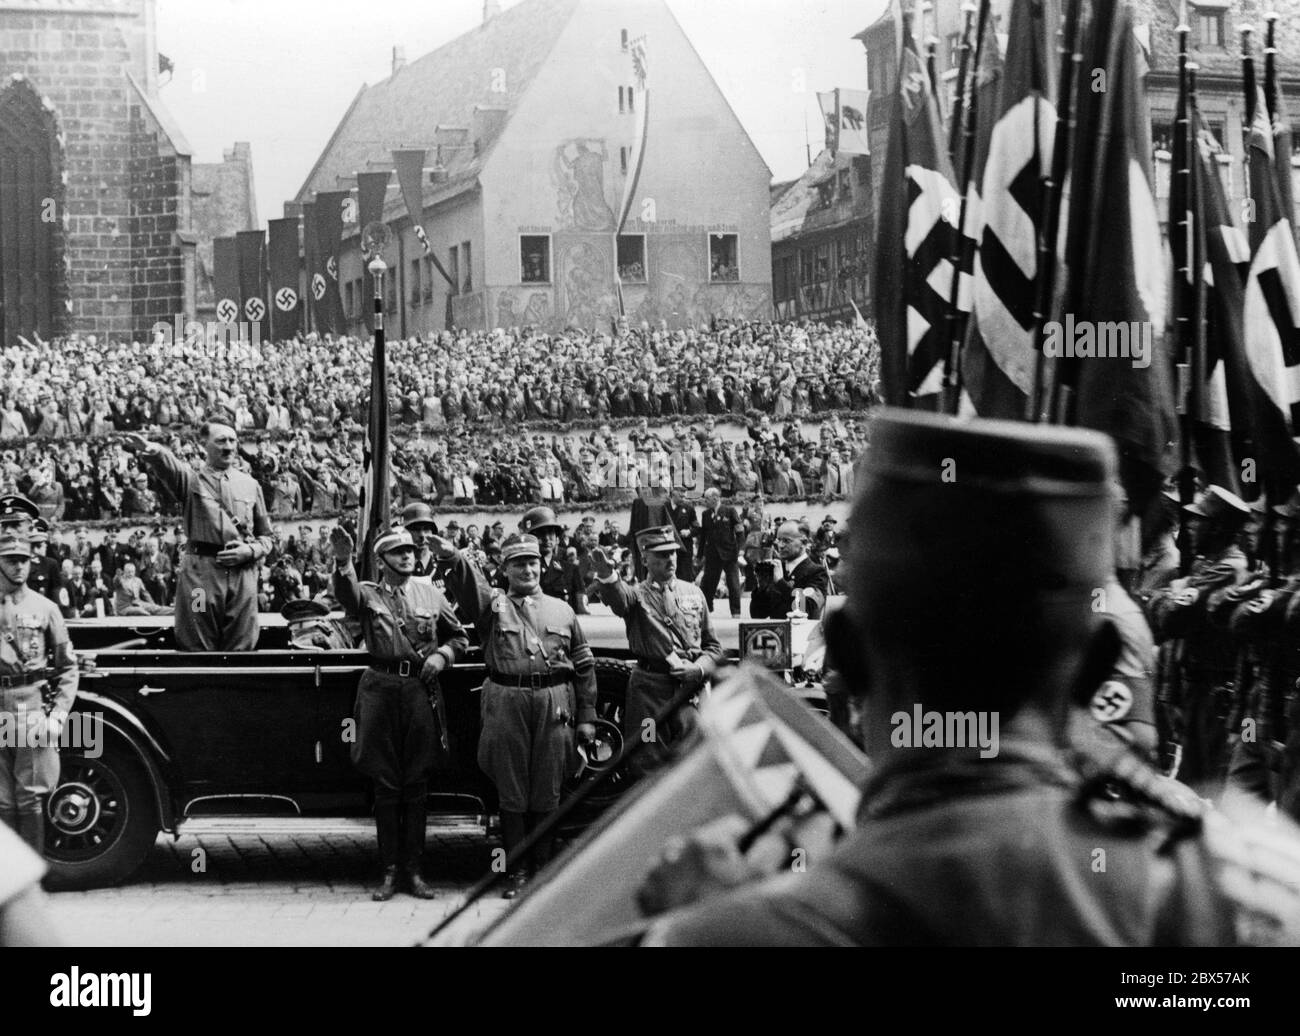 During the Reich Party Congress of Labor, Adolf Hitler takes the salute of the Nazi formations in his Mercedes on Nuremberg's main market square, the so-called Adolf-Hitler-Platz. In front of the car, Franz Pfeffer von Salomon, Hermann Goering, Adolf Huehnlein and Viktor Lutze (from right). Behind them, the grandstand. Stock Photo